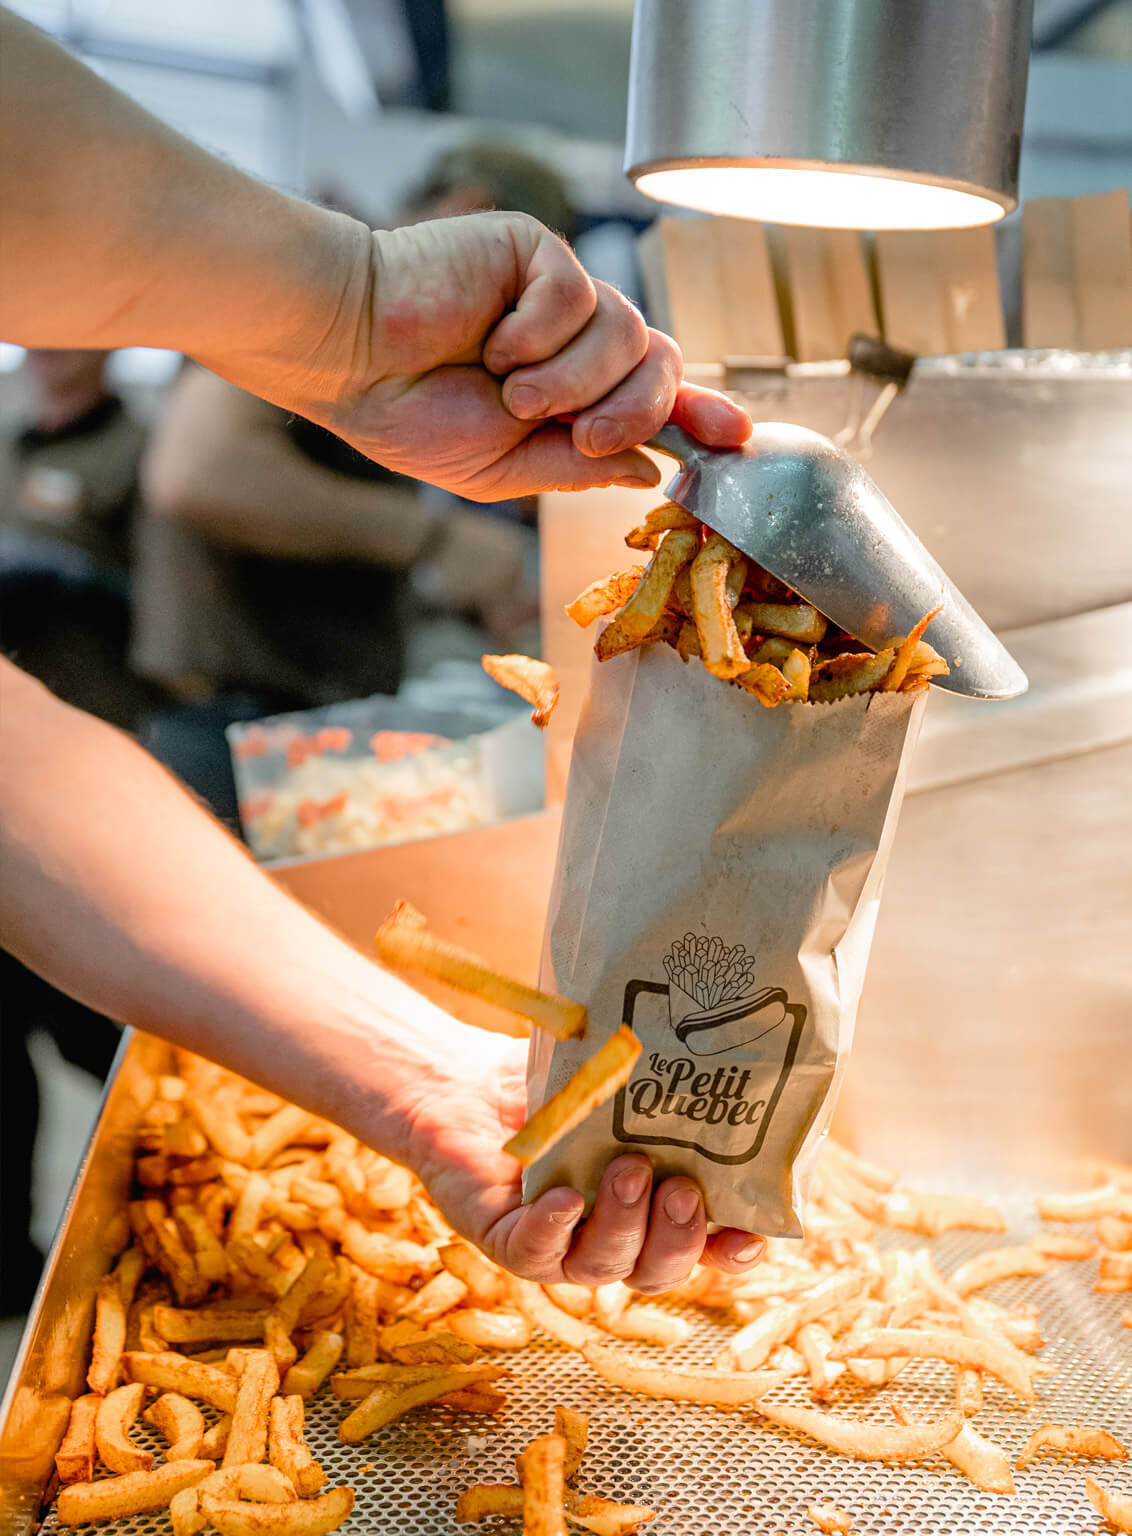 Hand putting fries in a Le Petit Québec paper bag in a fast-food restaurant